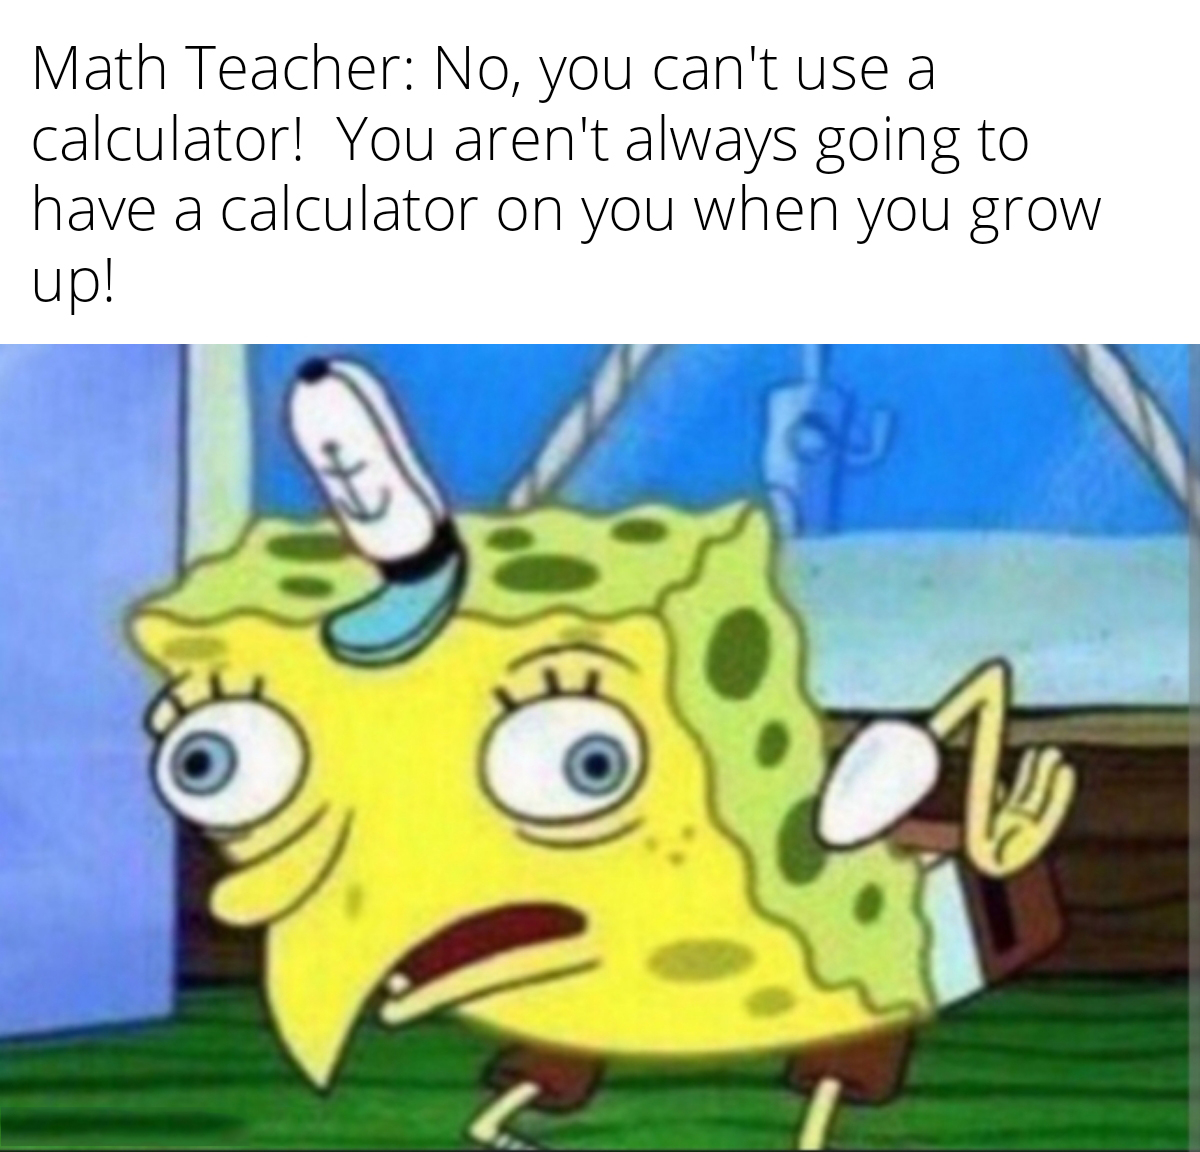 funny memes and pics - spongebob meme mocking generator - Math Teacher No, you can't use a calculator! You aren't always going to have a calculator on you when you grow up!